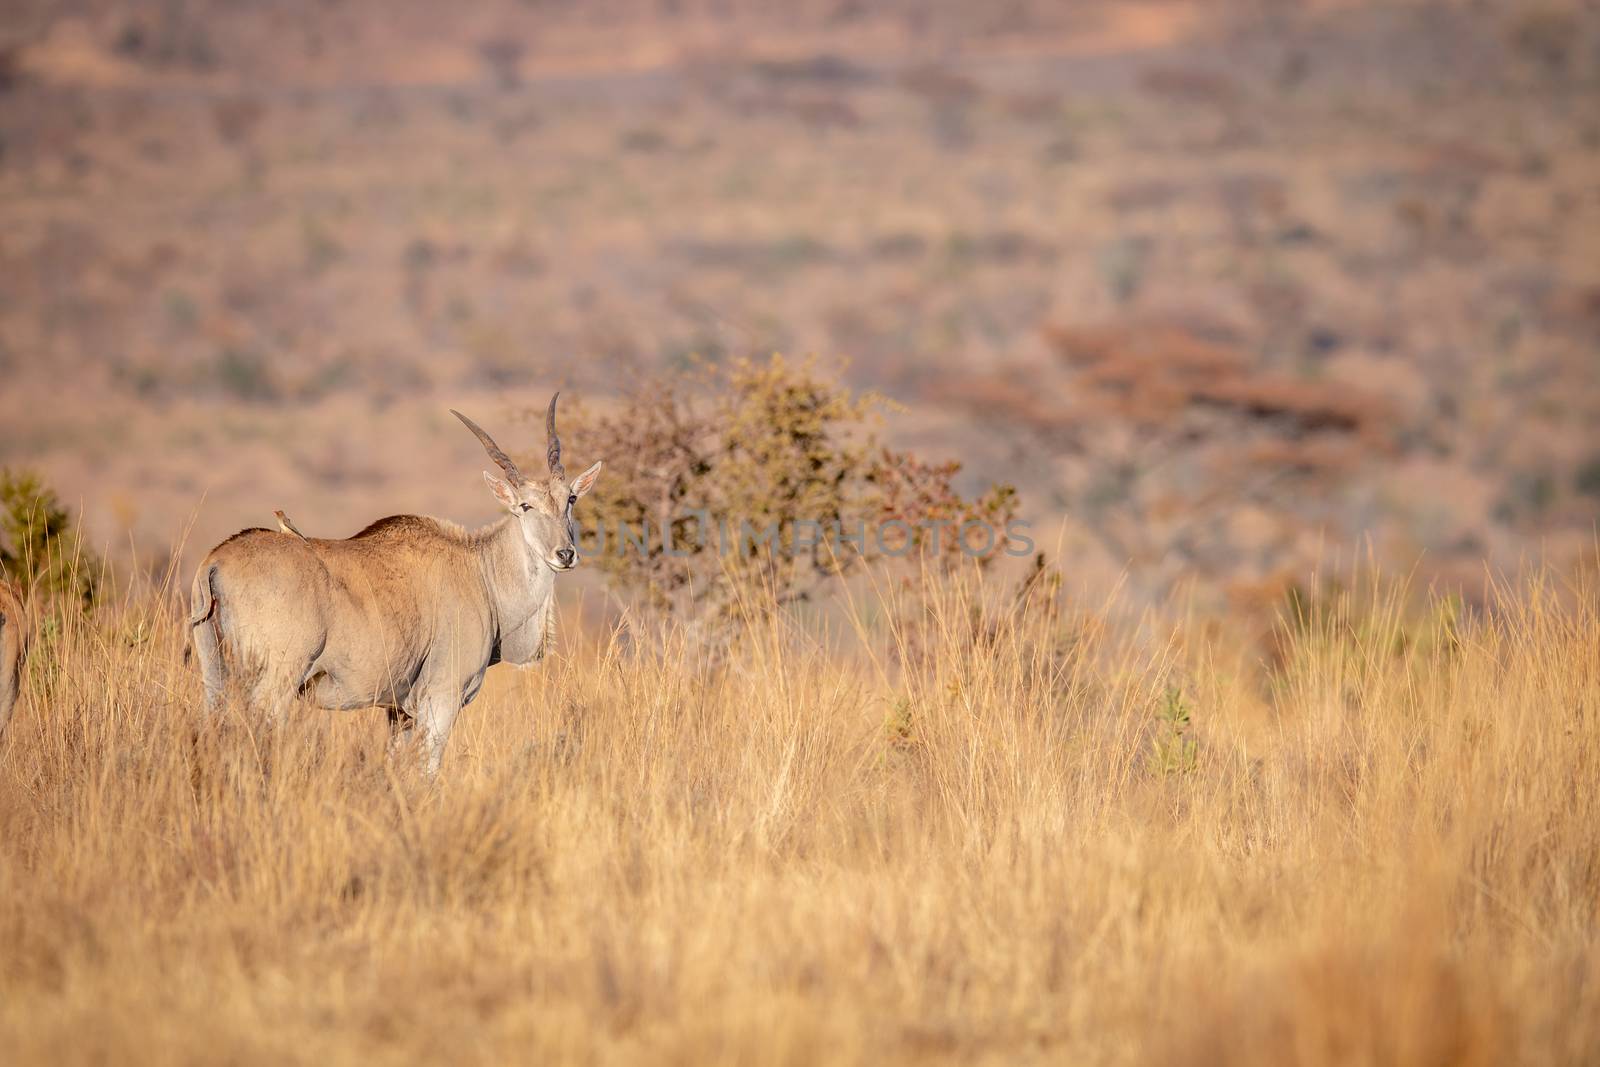 Eland standing in the high grass in the Welgevonden game reserve, South Africa.